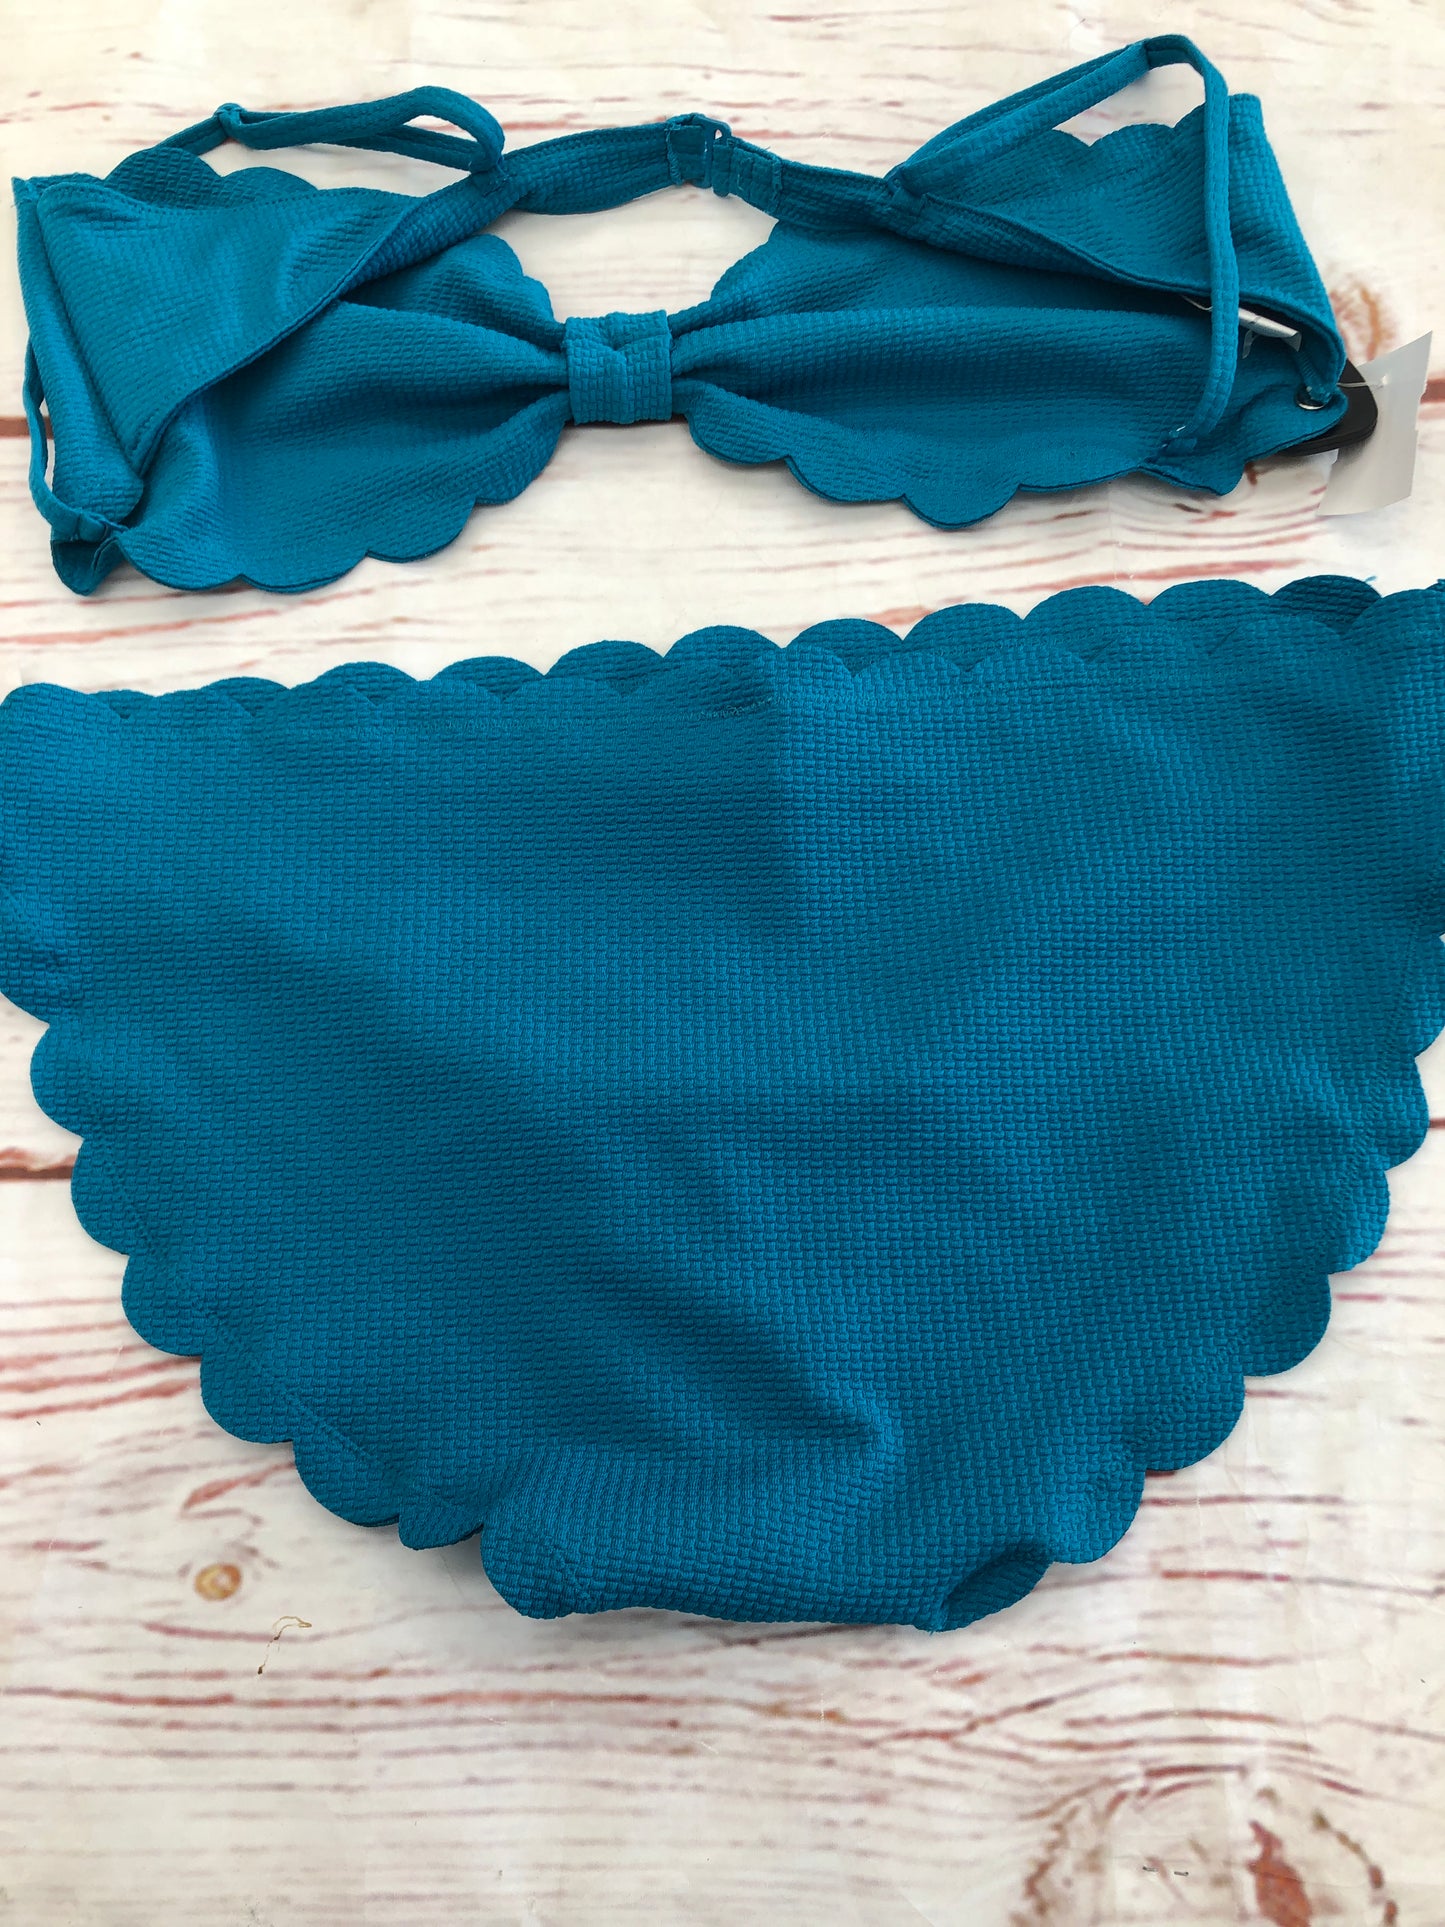 Swimsuit 2pc By Old Navy  Size: Xxl